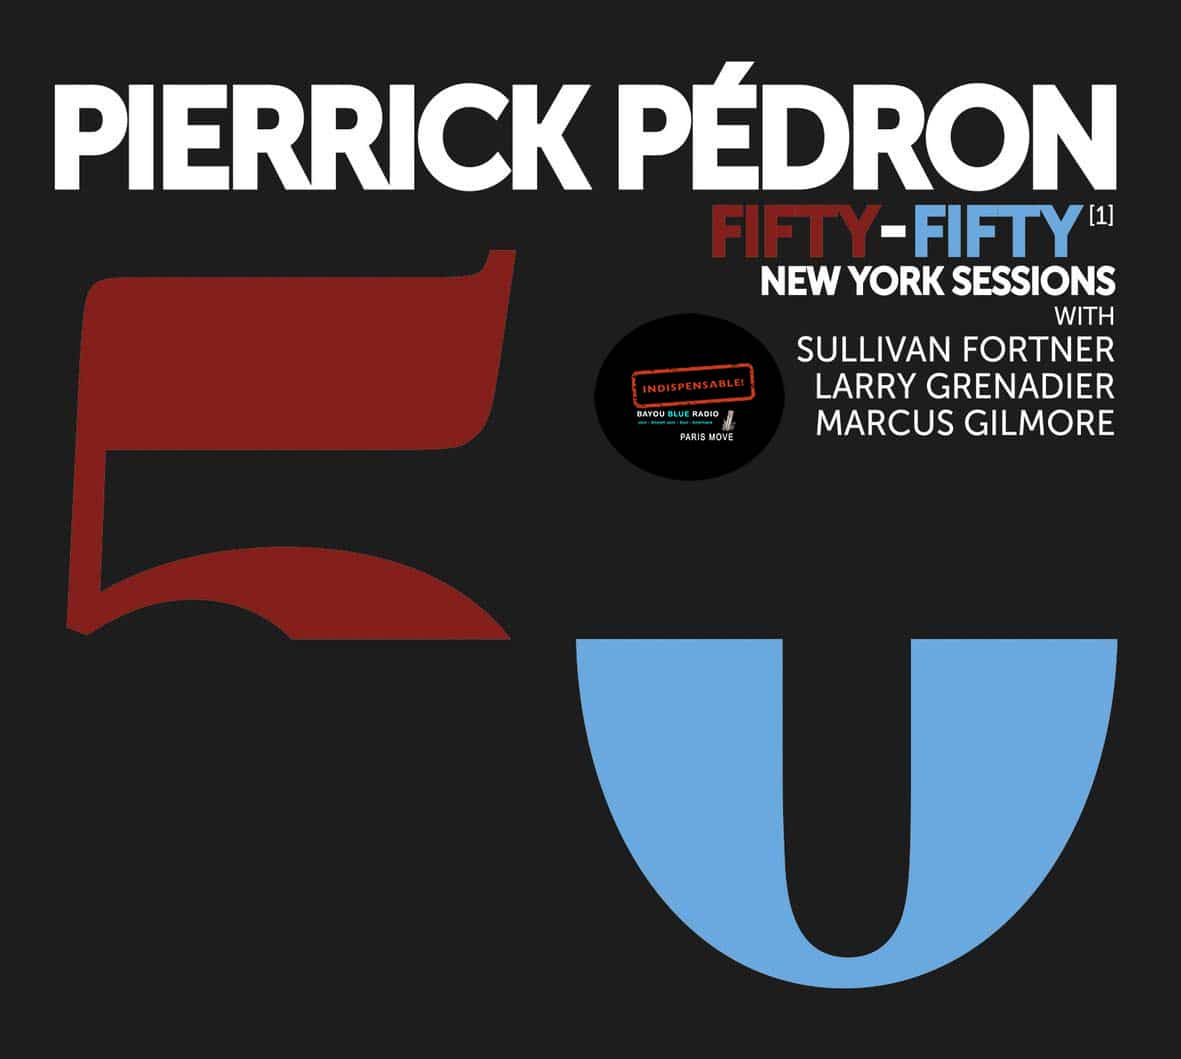 Pierrick Pedron – Fifty-Fifty – New York Sessions